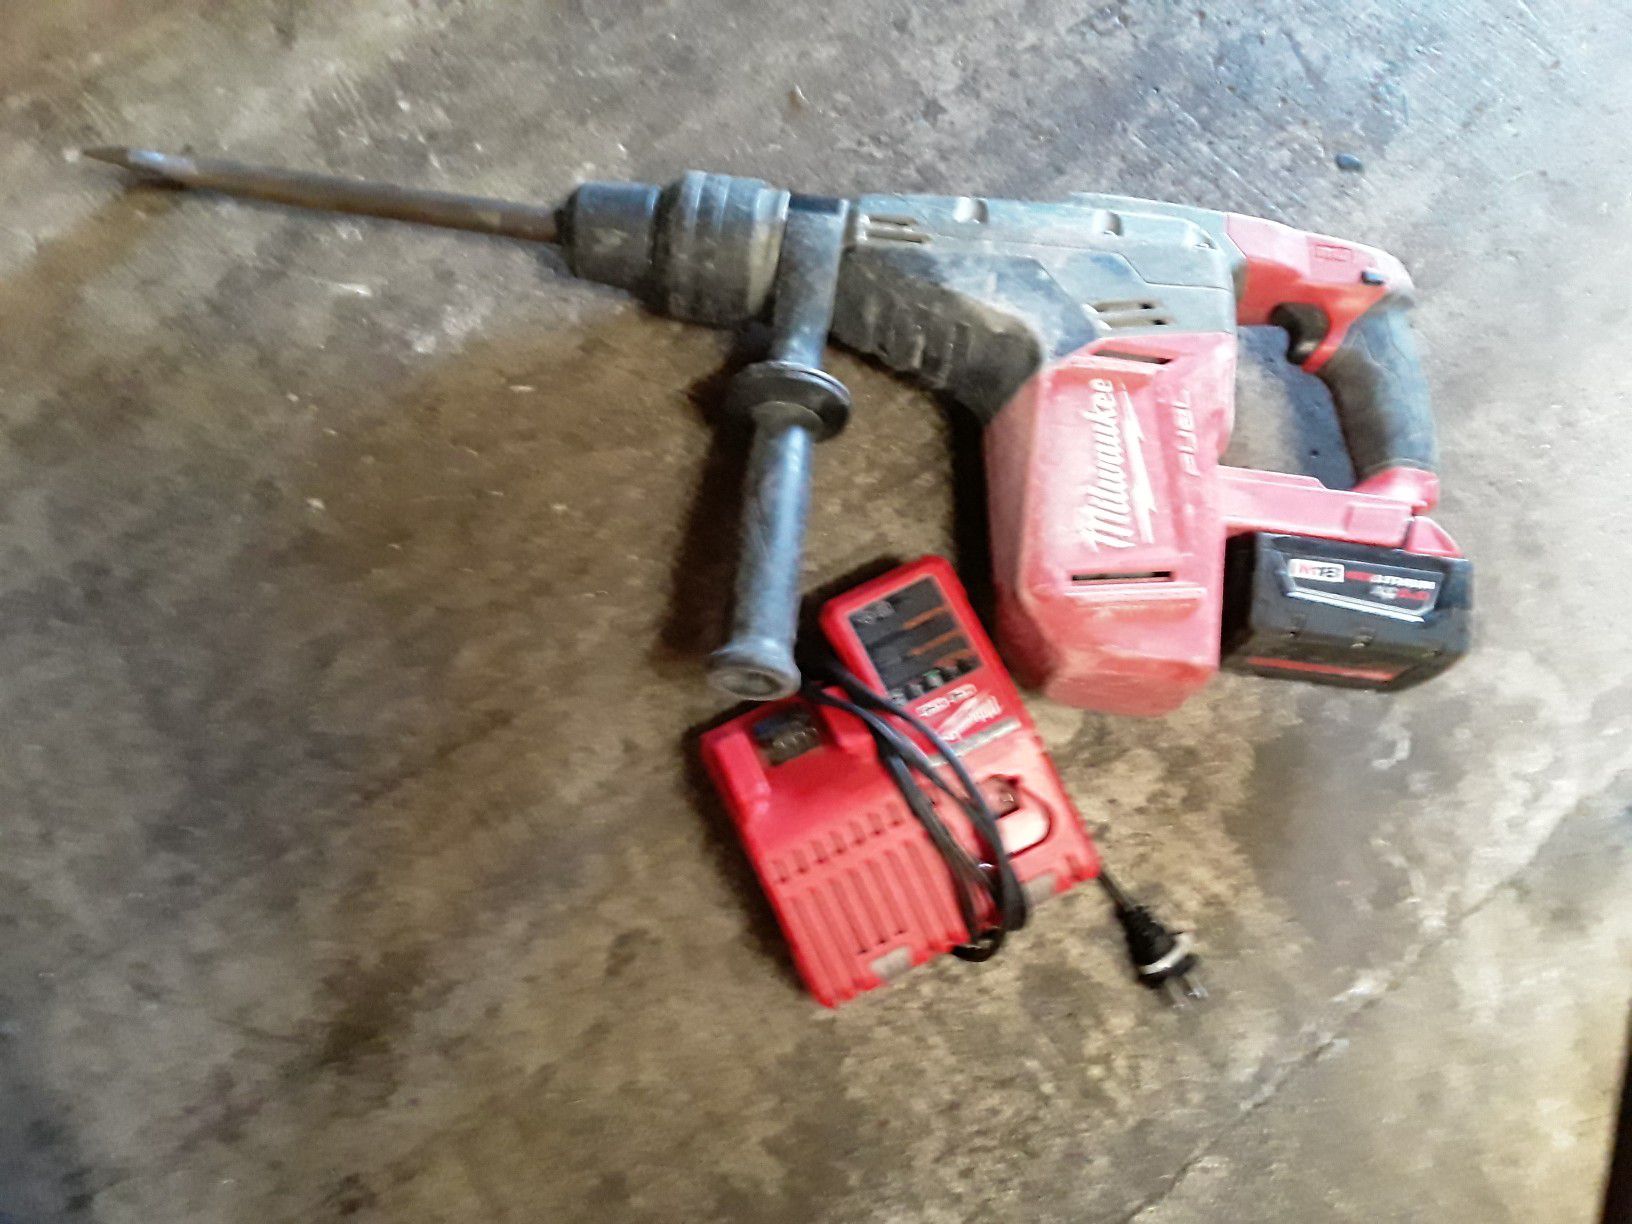 Milwaukee Jack hammer drill for sale works good price firm no low ballers please